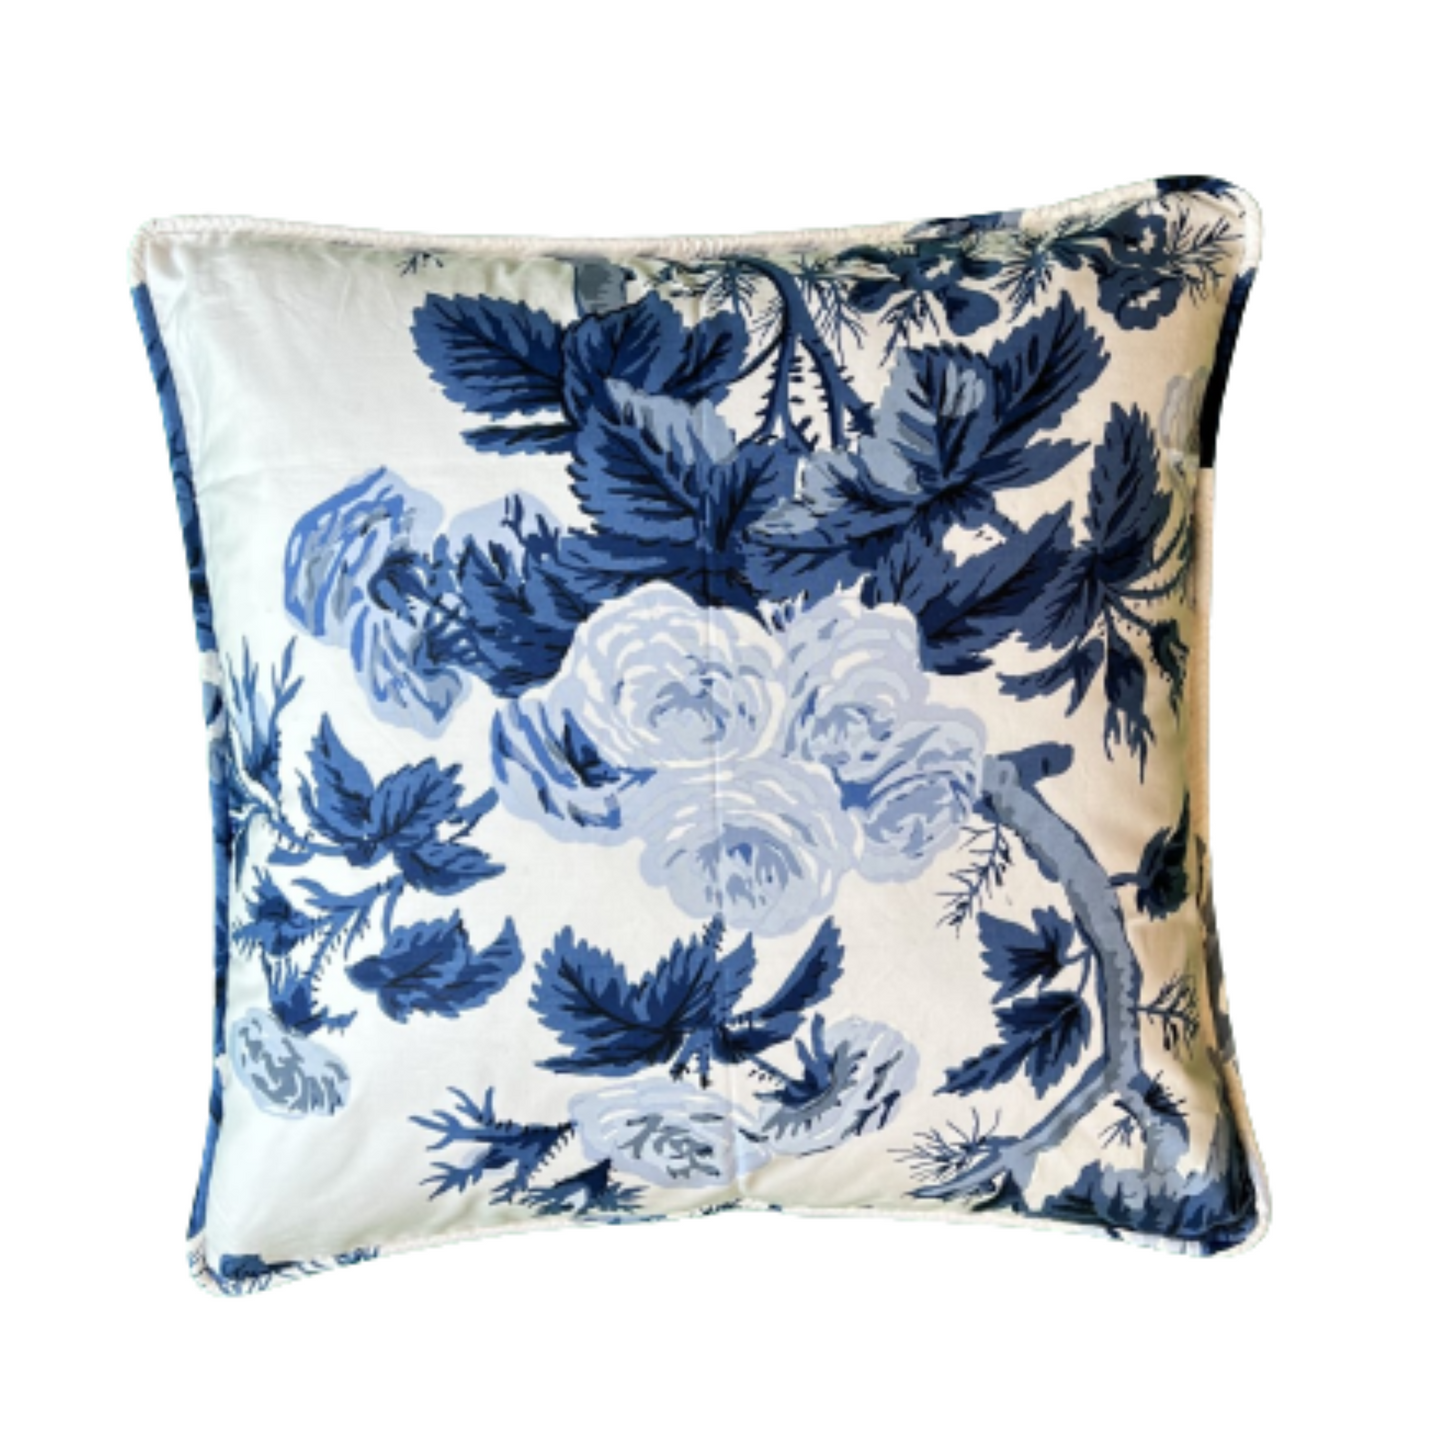 Pyne Hollyhock Iconic Print 18 x 18 Square Decorative Pillow with Down Feather Insert